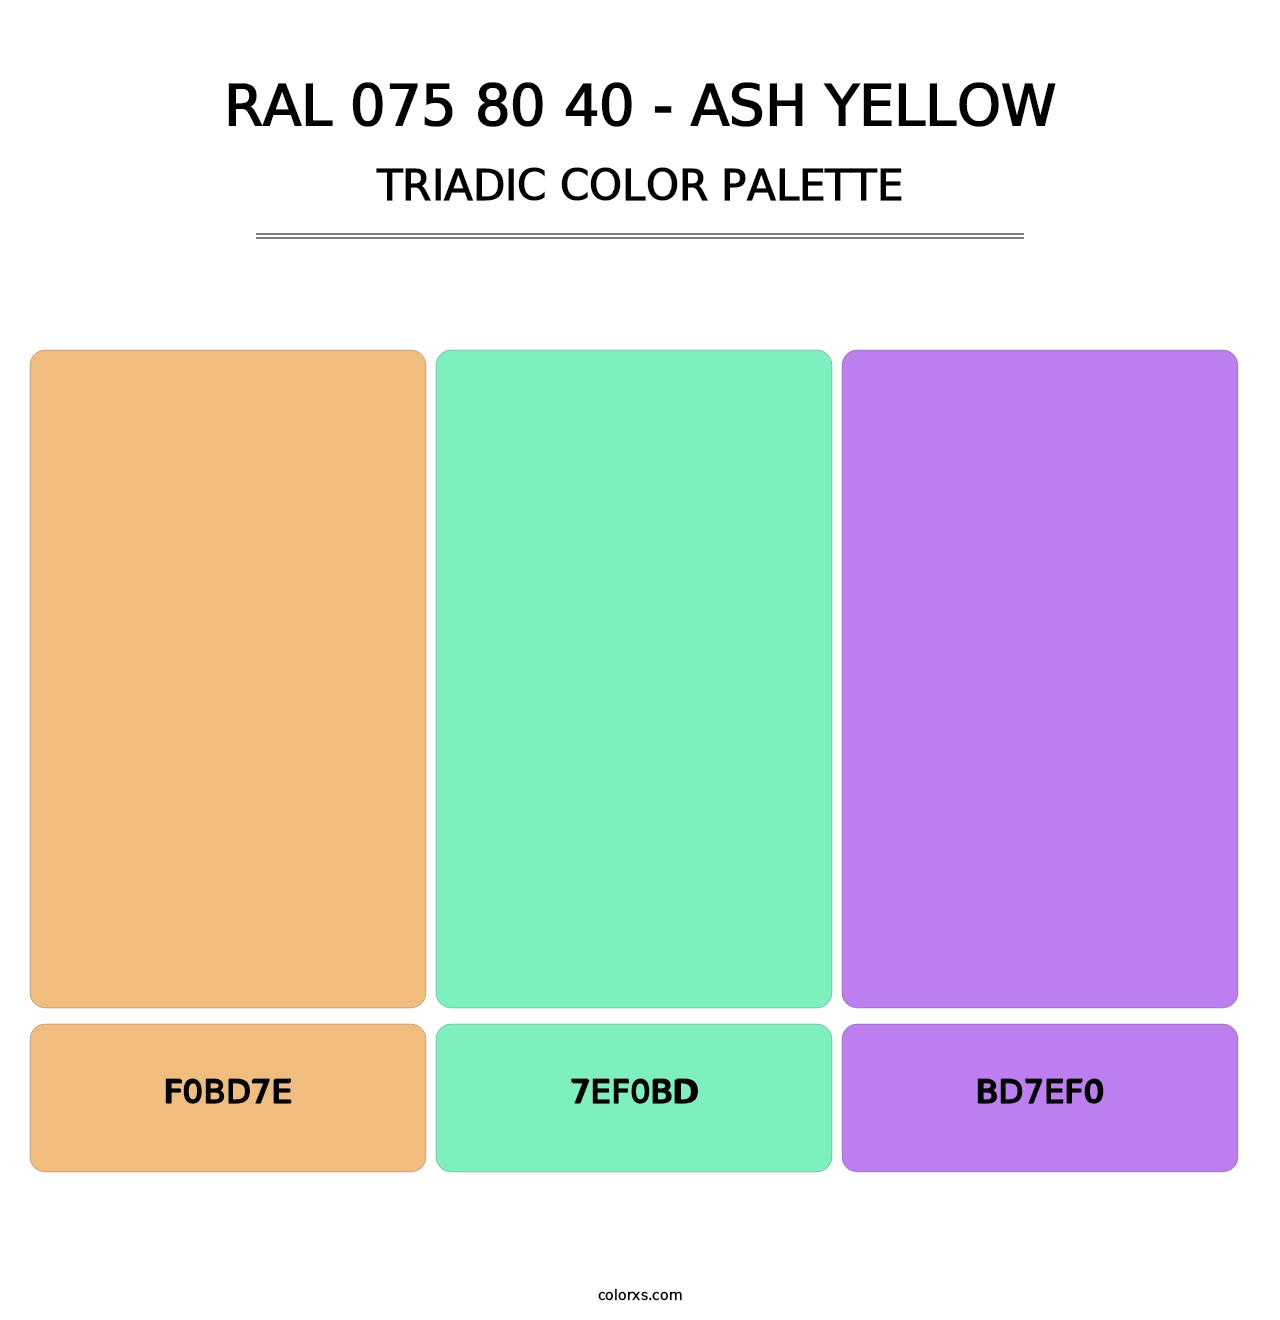 RAL 075 80 40 - Ash Yellow - Triadic Color Palette